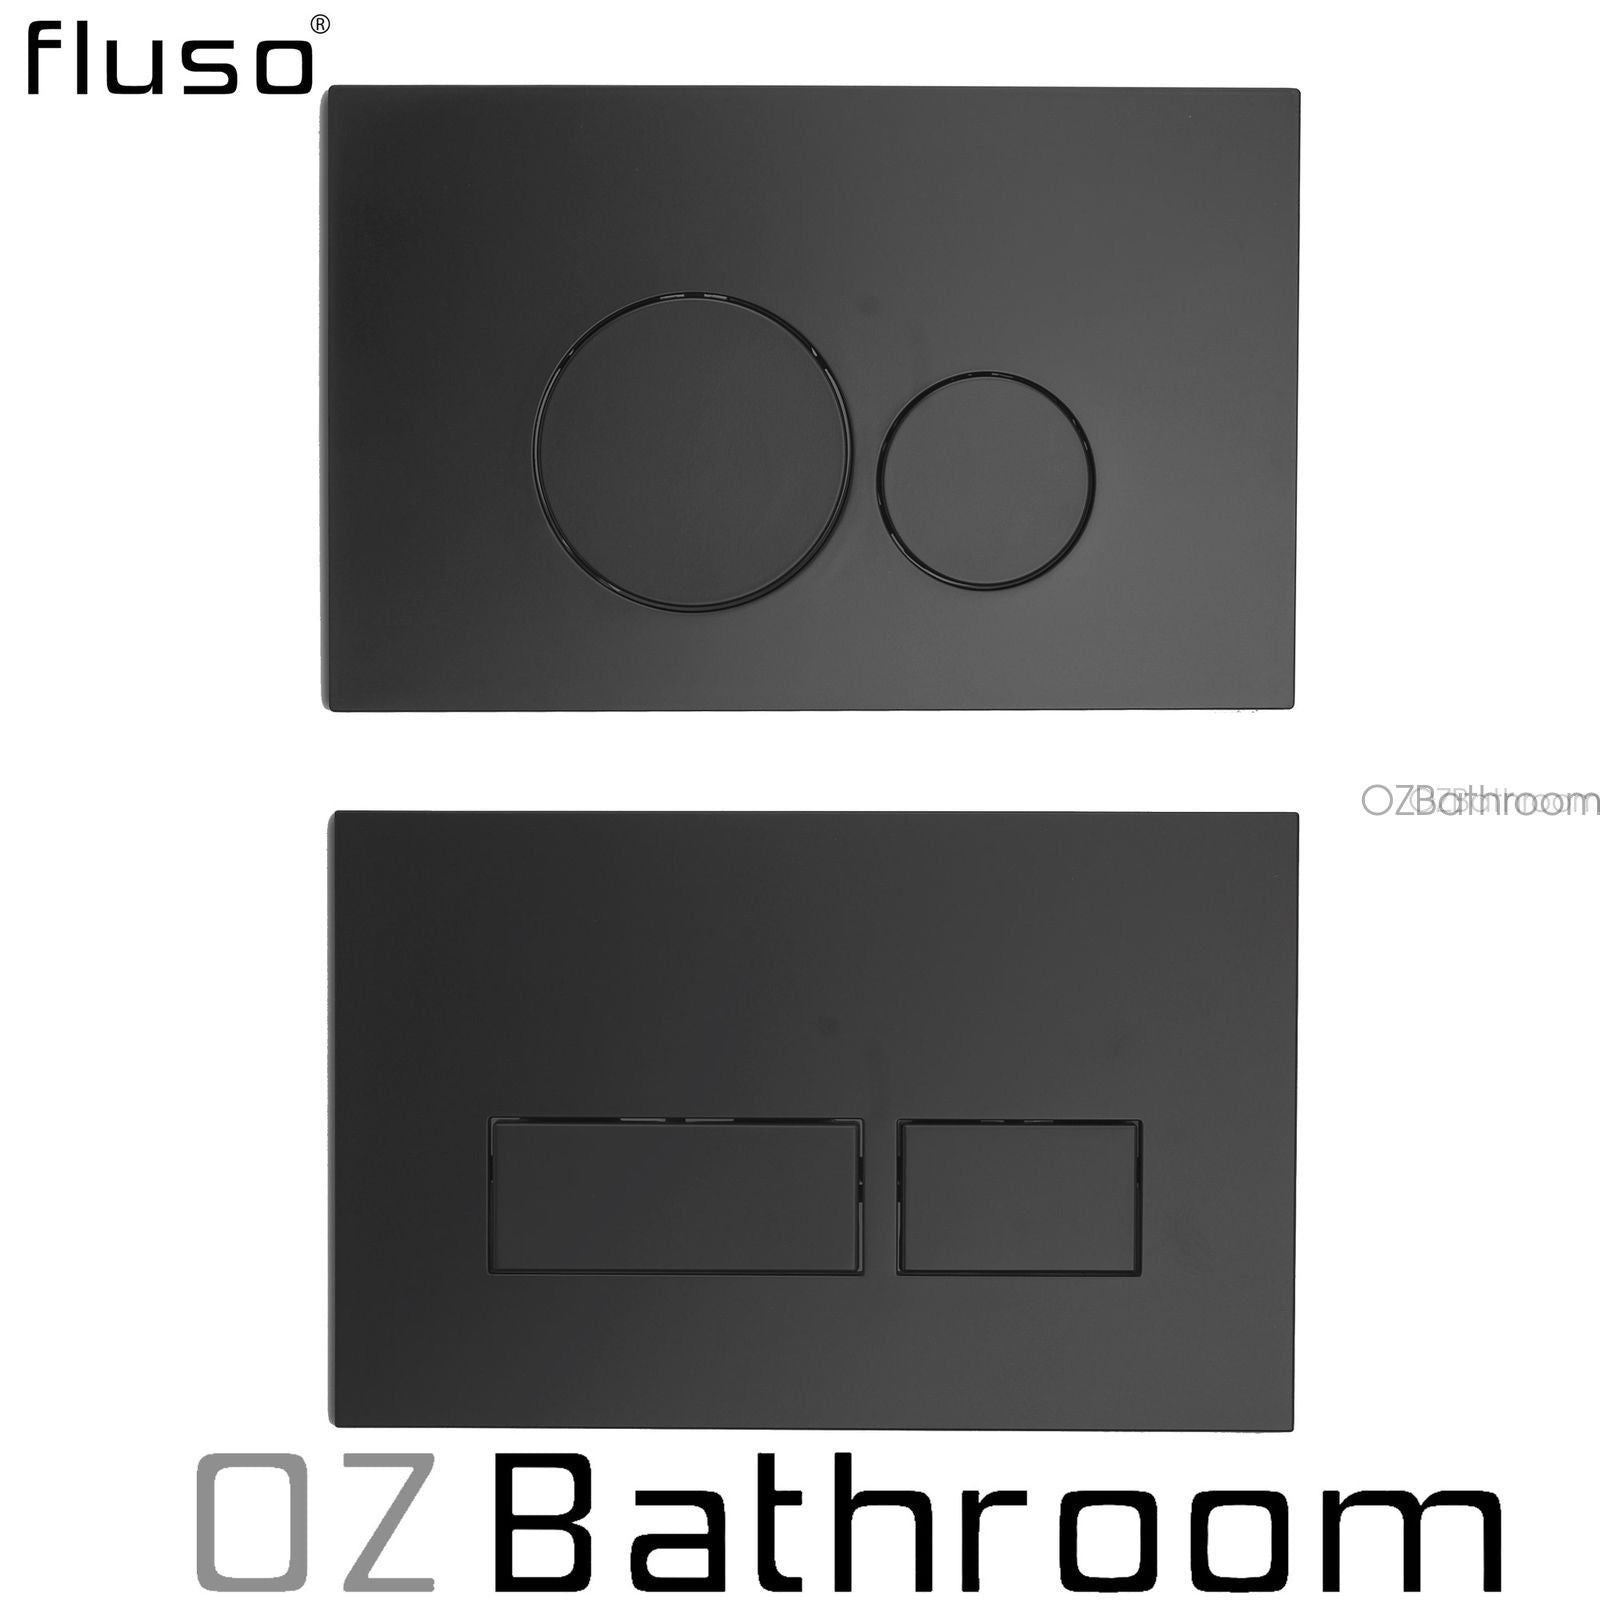 NEW BLACK Toilet Black-White Concealed inwall recessed cistern floor Toilet for white bathroom